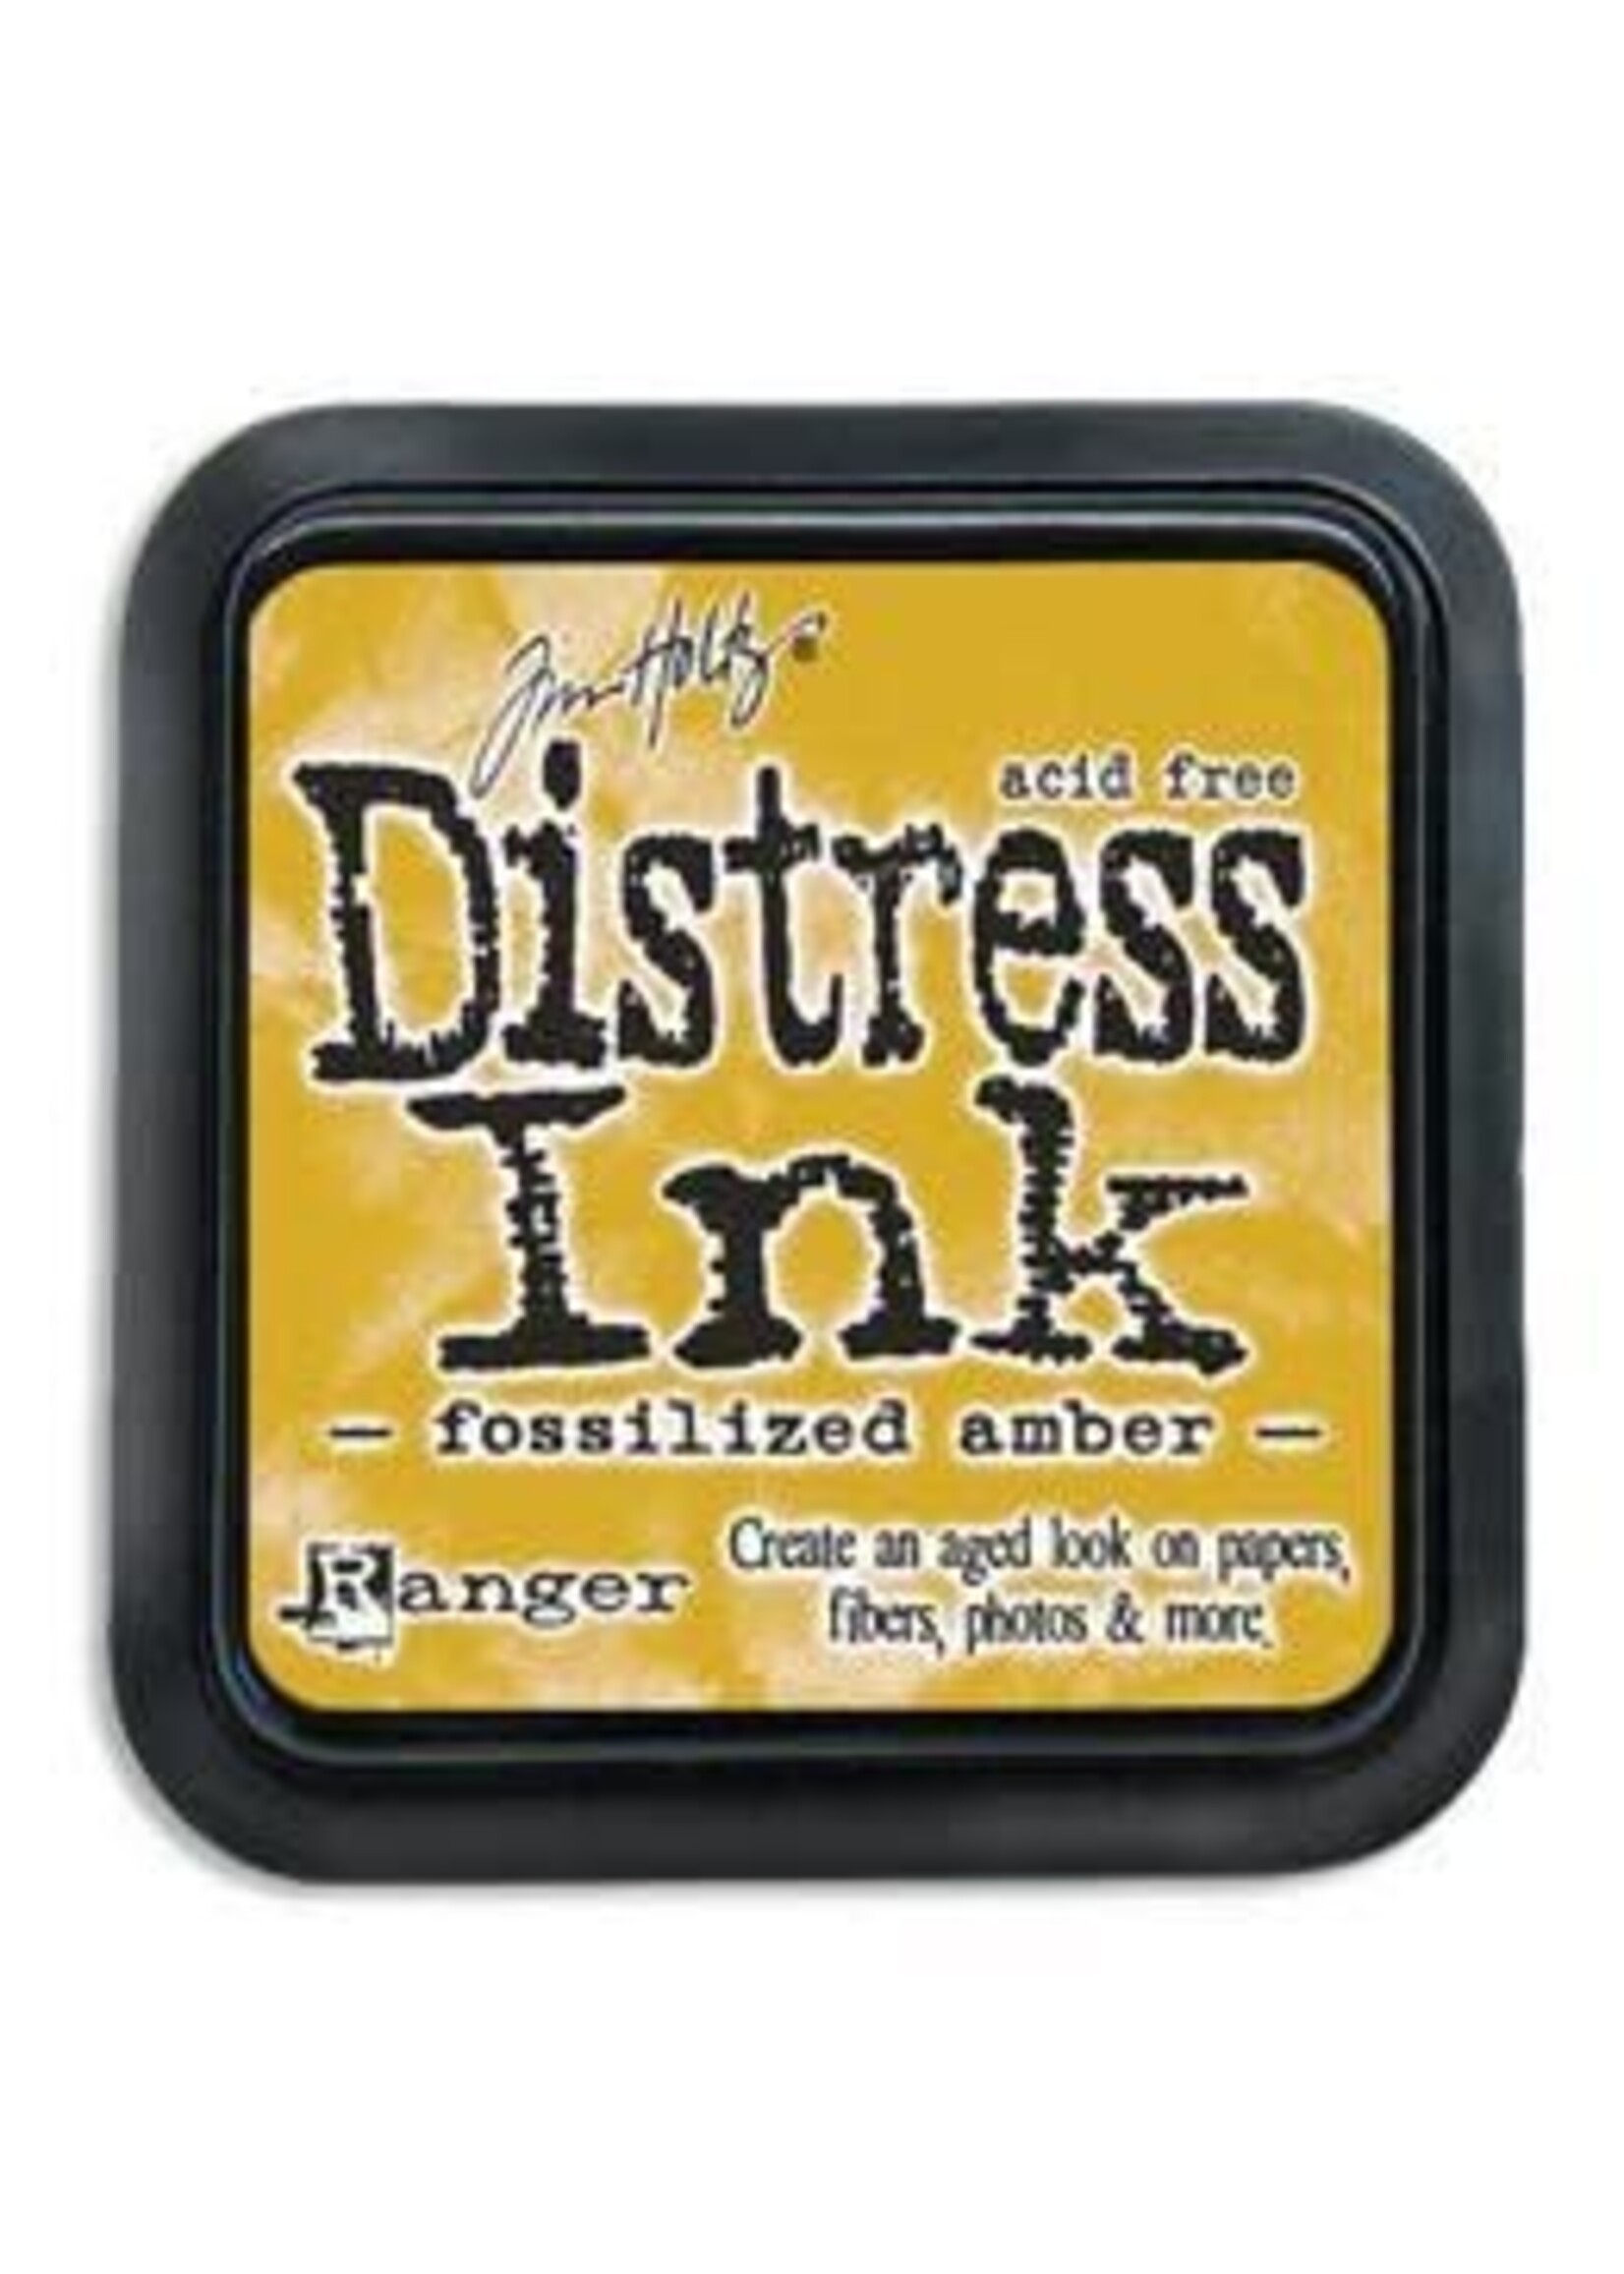 RANGER Distress Ink Fossilized Amber